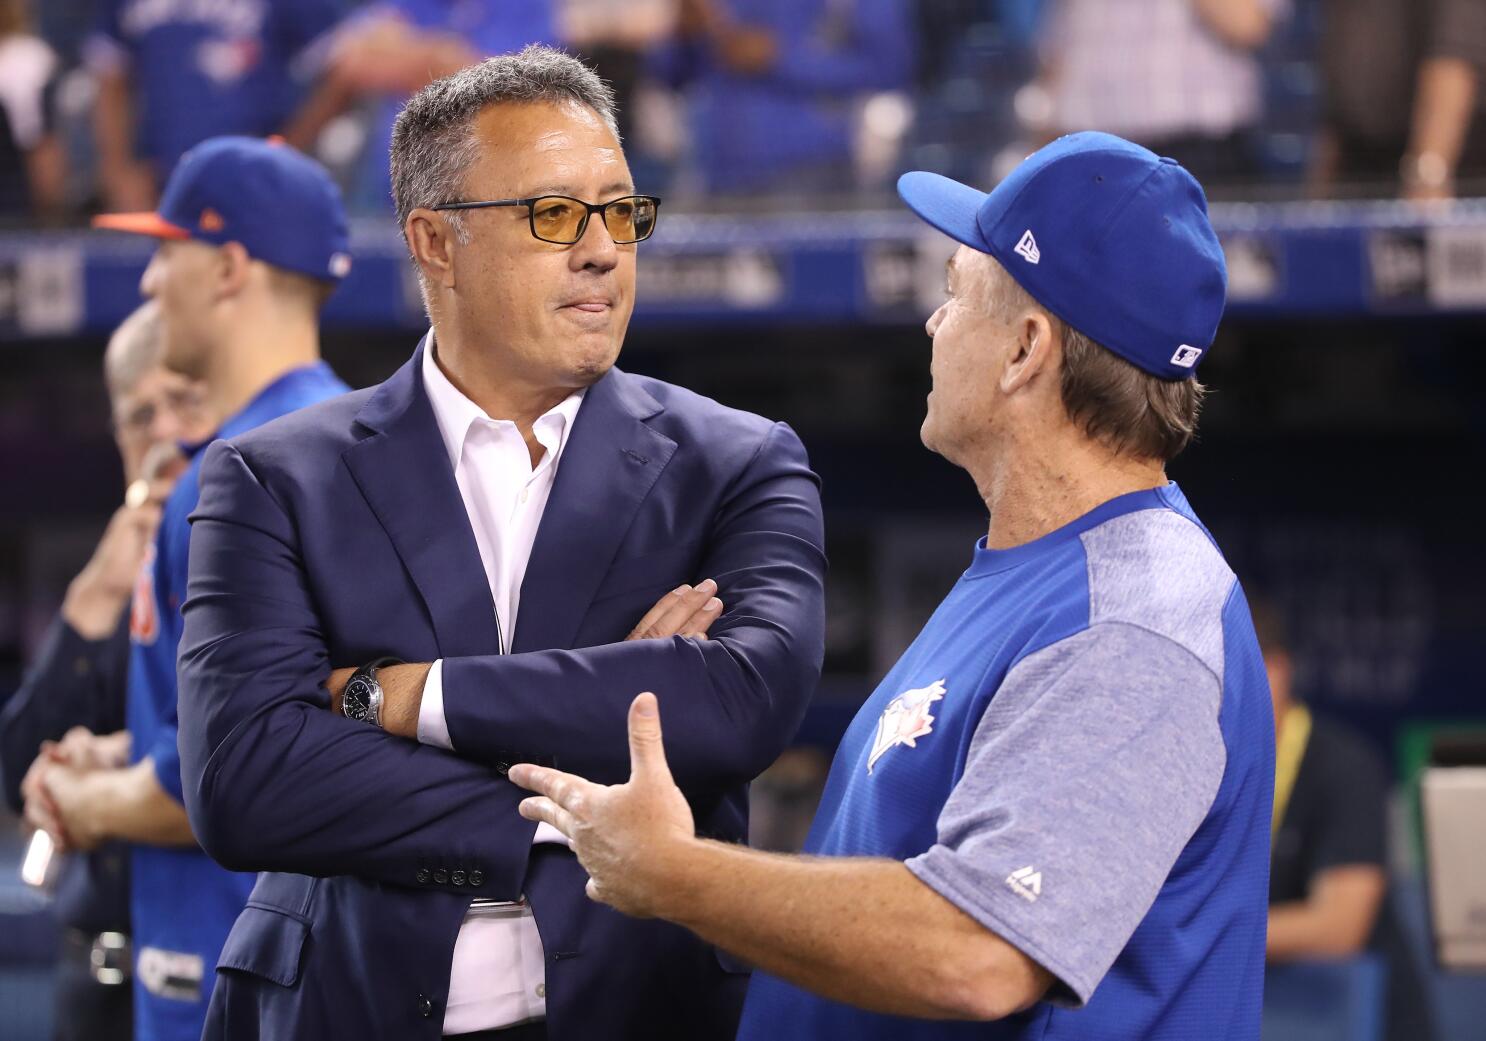 TBS' Ron Darling to appreciate every pitch after health scare - Los Angeles  Times